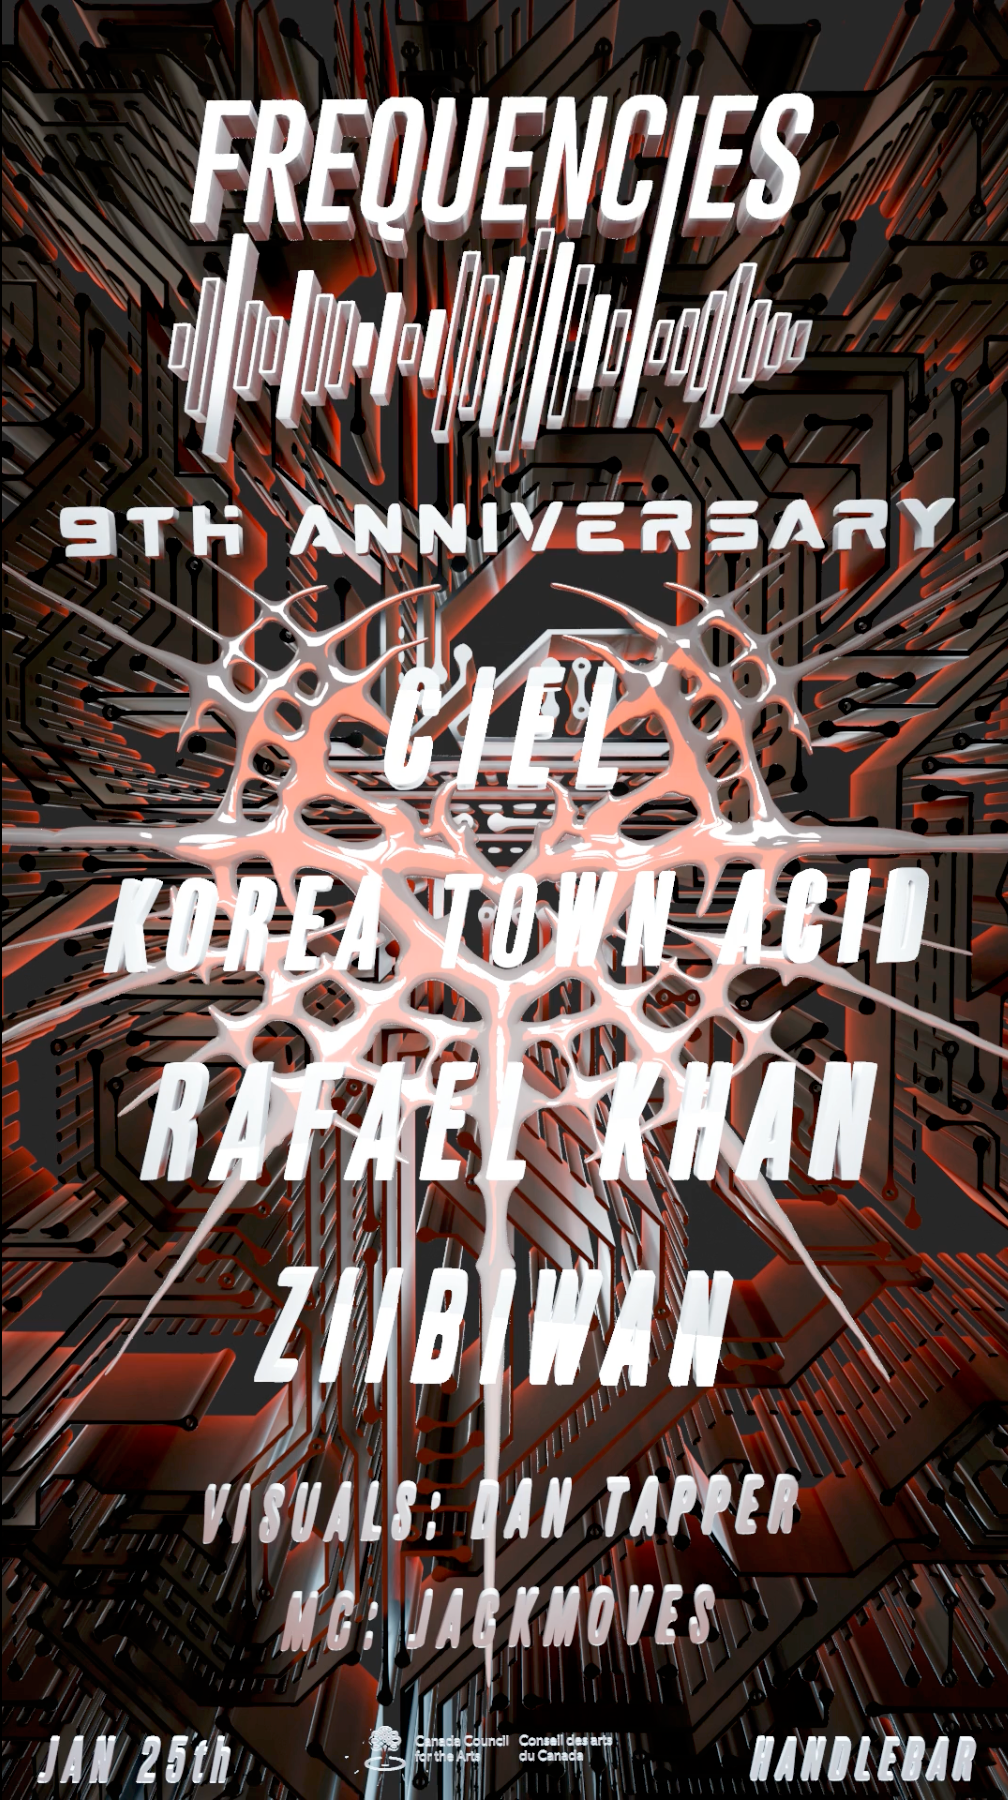 Frequencies: 9 Year Anniversary - Thursday - Página frontal